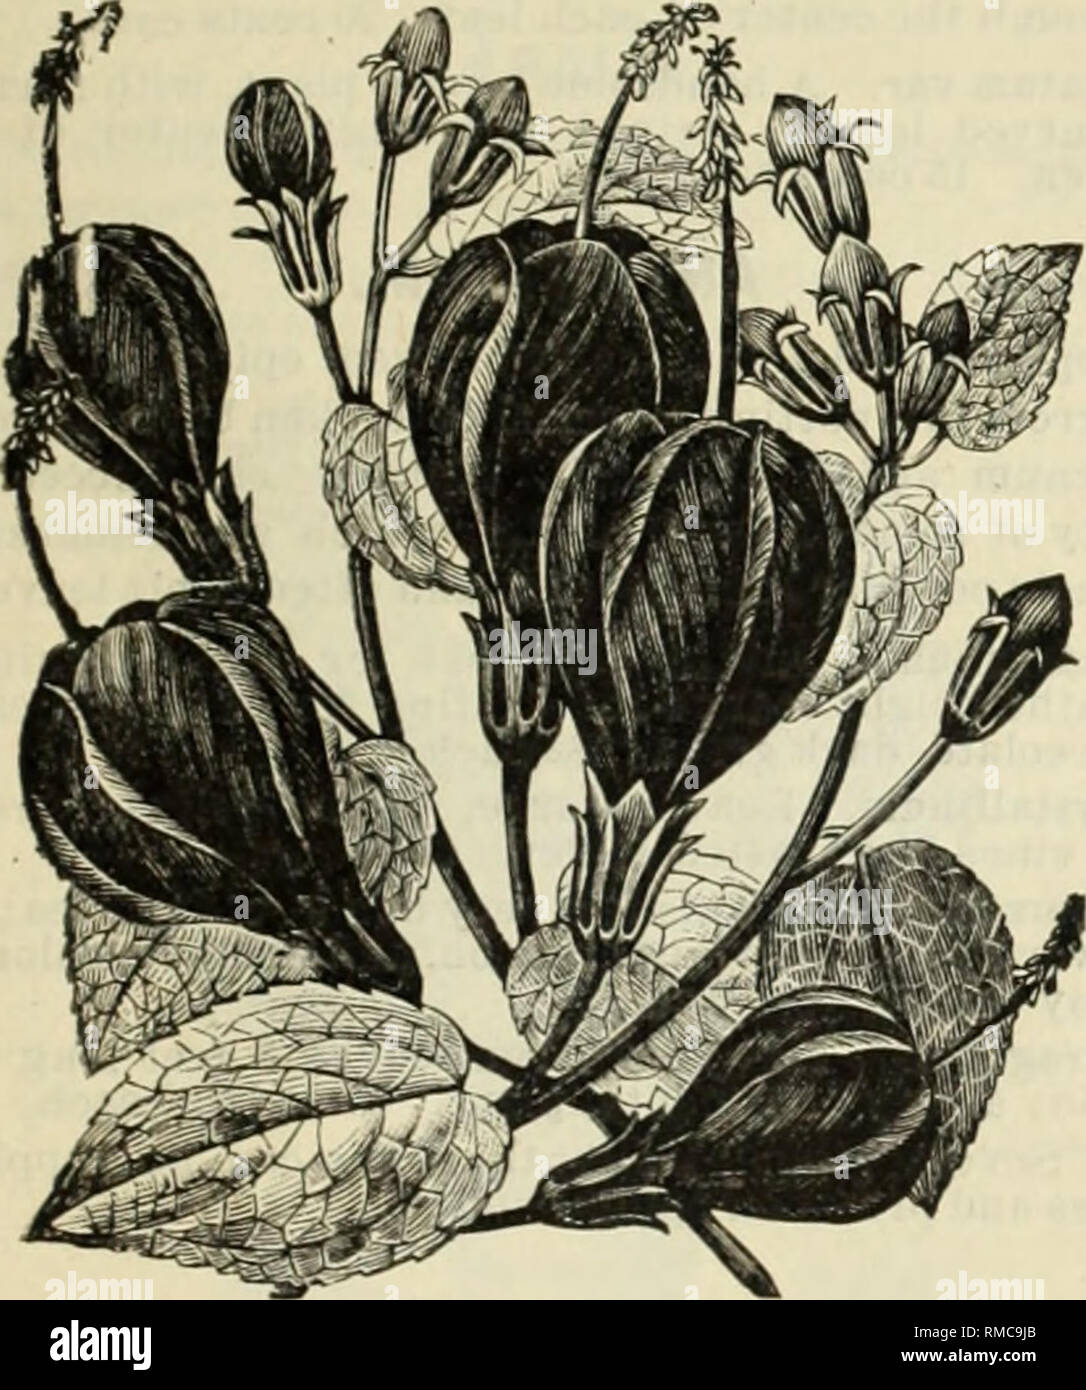 . Annual illustrated and descriptive catalogue of new, rare and beautiful plants and seeds. Nurseries (Horticulture), Florida, Catalogs; Plants, Ornamental, Catalogs; Flowers, Catalogs; Tropical plants, Catalogs; Fruit trees, Seedlings, Catalogs. 53 ACALYPHA. A. inarginata. The Acalyphus are handsome plants, with variegated foliage, succeediuf; well here in the open J round, sprouting: readily from the root if cut down by I l ost, and requiring little attention. In this variety the leaves are margined with several shades of white and pink. A. Mossiae. Variegation beautiful; leaves crimped and  Stock Photo